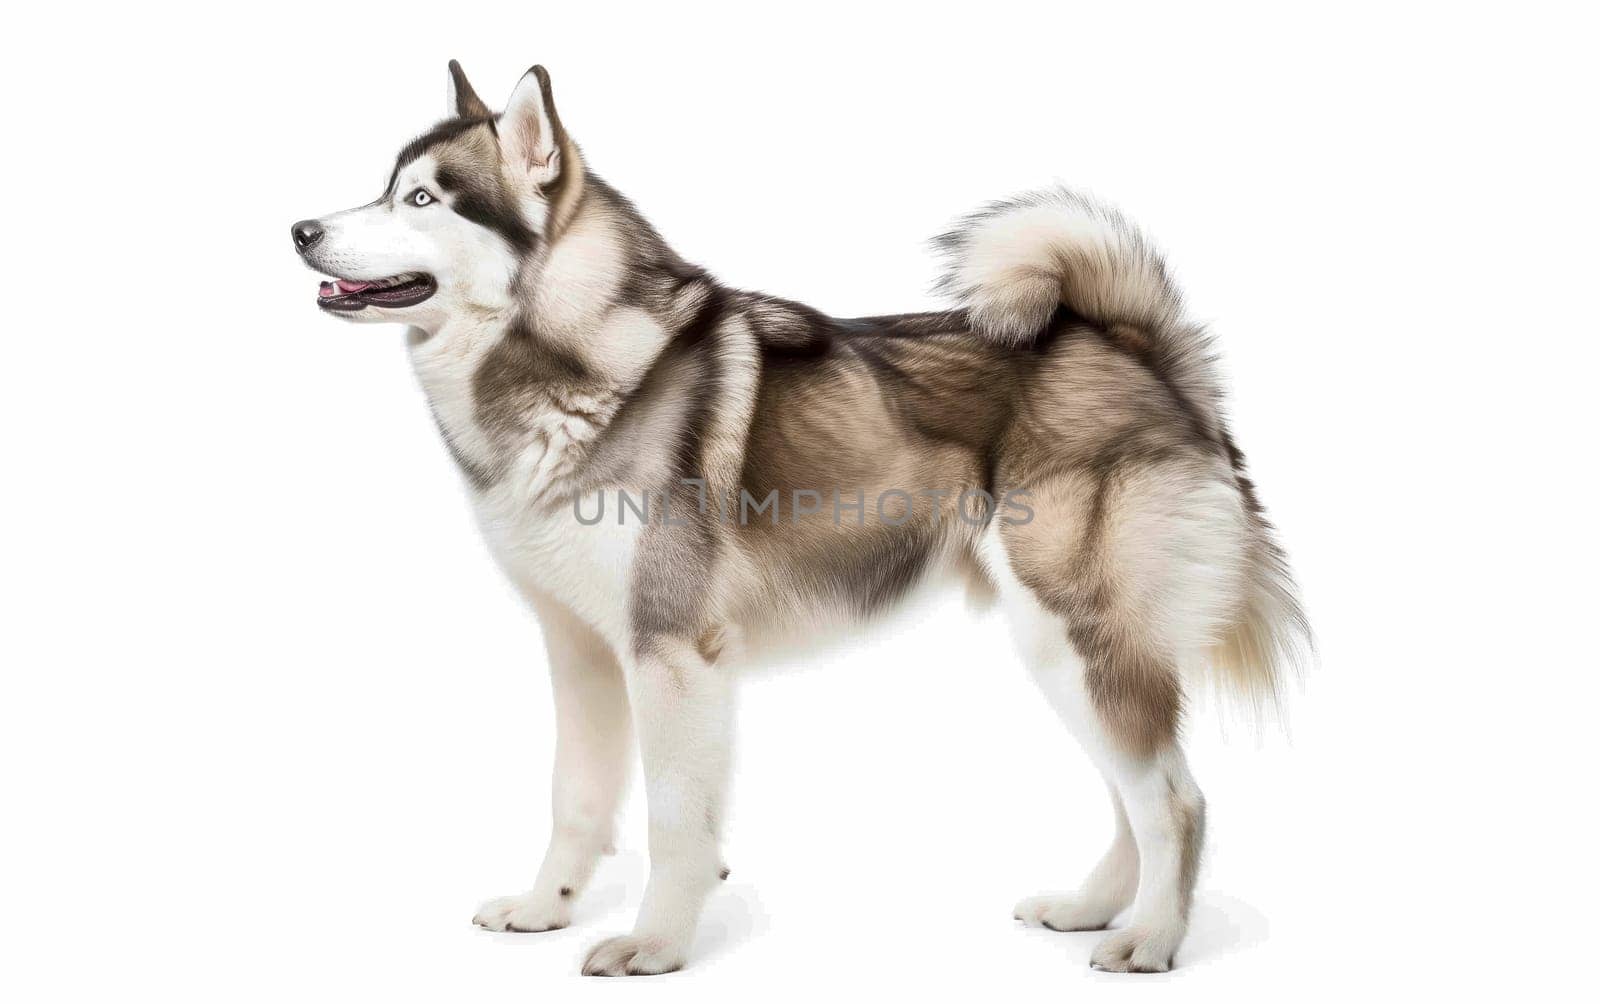 An Alaskan Malamute stands in profile against a white background, showcasing its thick fur and proud stance. This image captures the breed's characteristic wolf-like features and robust build. by sfinks